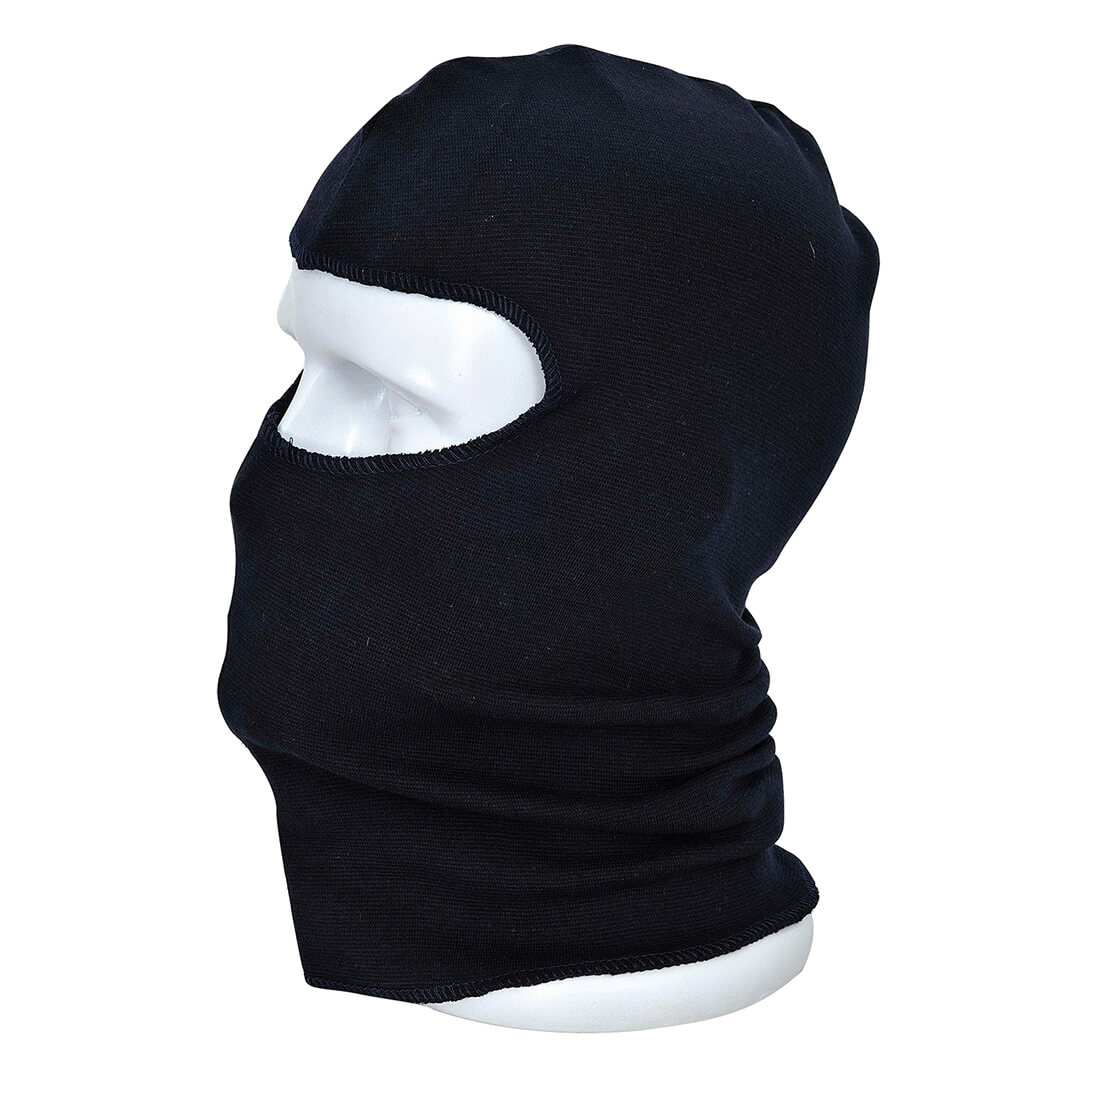 Image of Modaflame Flame Resistant Antistatic Balaclava Navy One Size